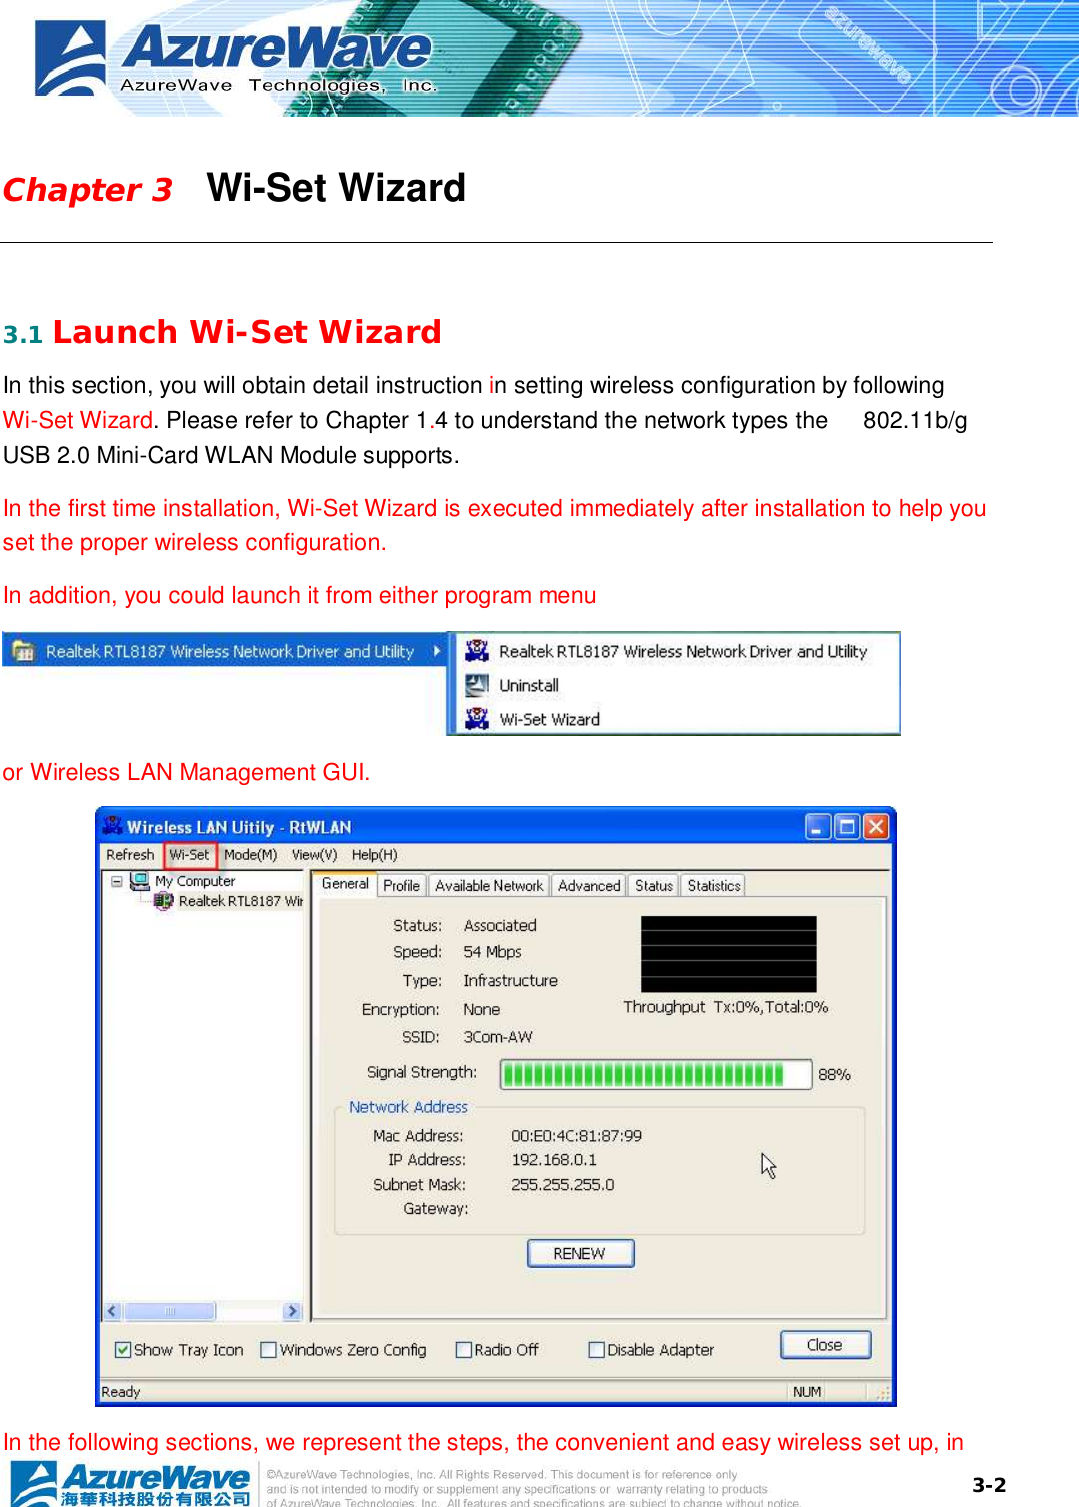  3-2Chapter 3   Wi-Set Wizard  3.1 Launch Wi-Set Wizard In this section, you will obtain detail instruction in setting wireless configuration by following Wi-Set Wizard. Please refer to Chapter 1.4 to understand the network types the   802.11b/g USB 2.0 Mini-Card WLAN Module supports. In the first time installation, Wi-Set Wizard is executed immediately after installation to help you set the proper wireless configuration.  In addition, you could launch it from either program menu    or Wireless LAN Management GUI.  In the following sections, we represent the steps, the convenient and easy wireless set up, in 